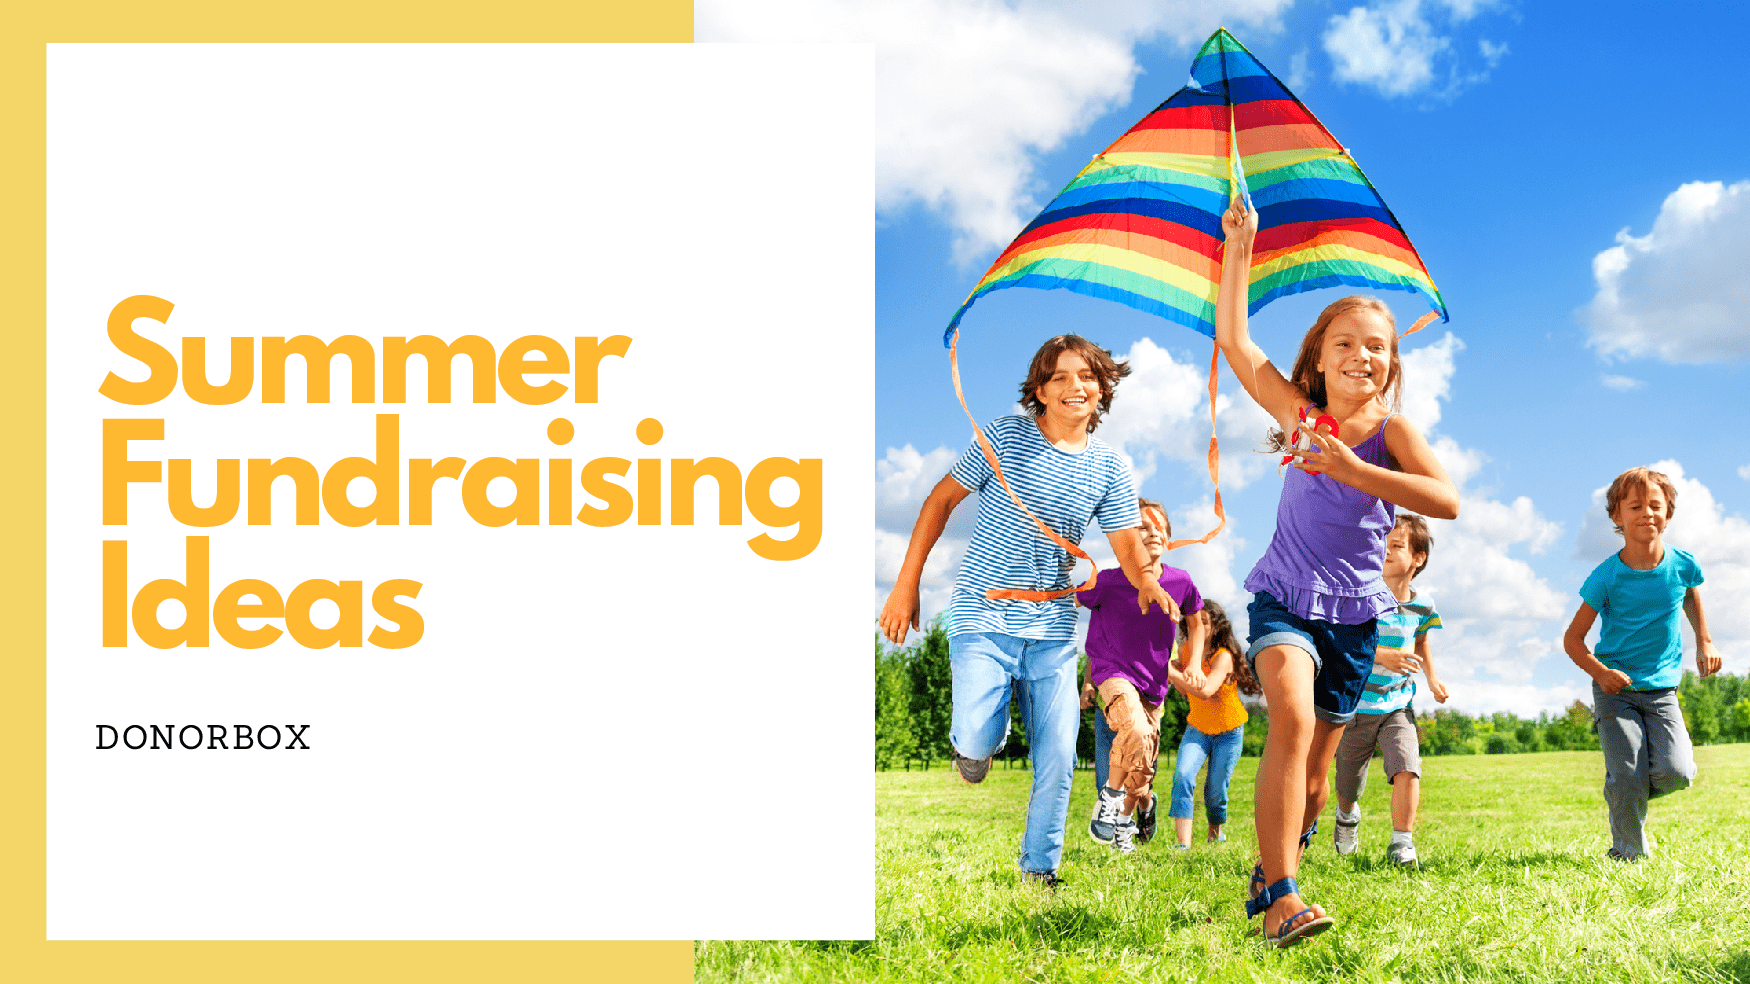 7 Summer Fundraising Ideas That Actually Work